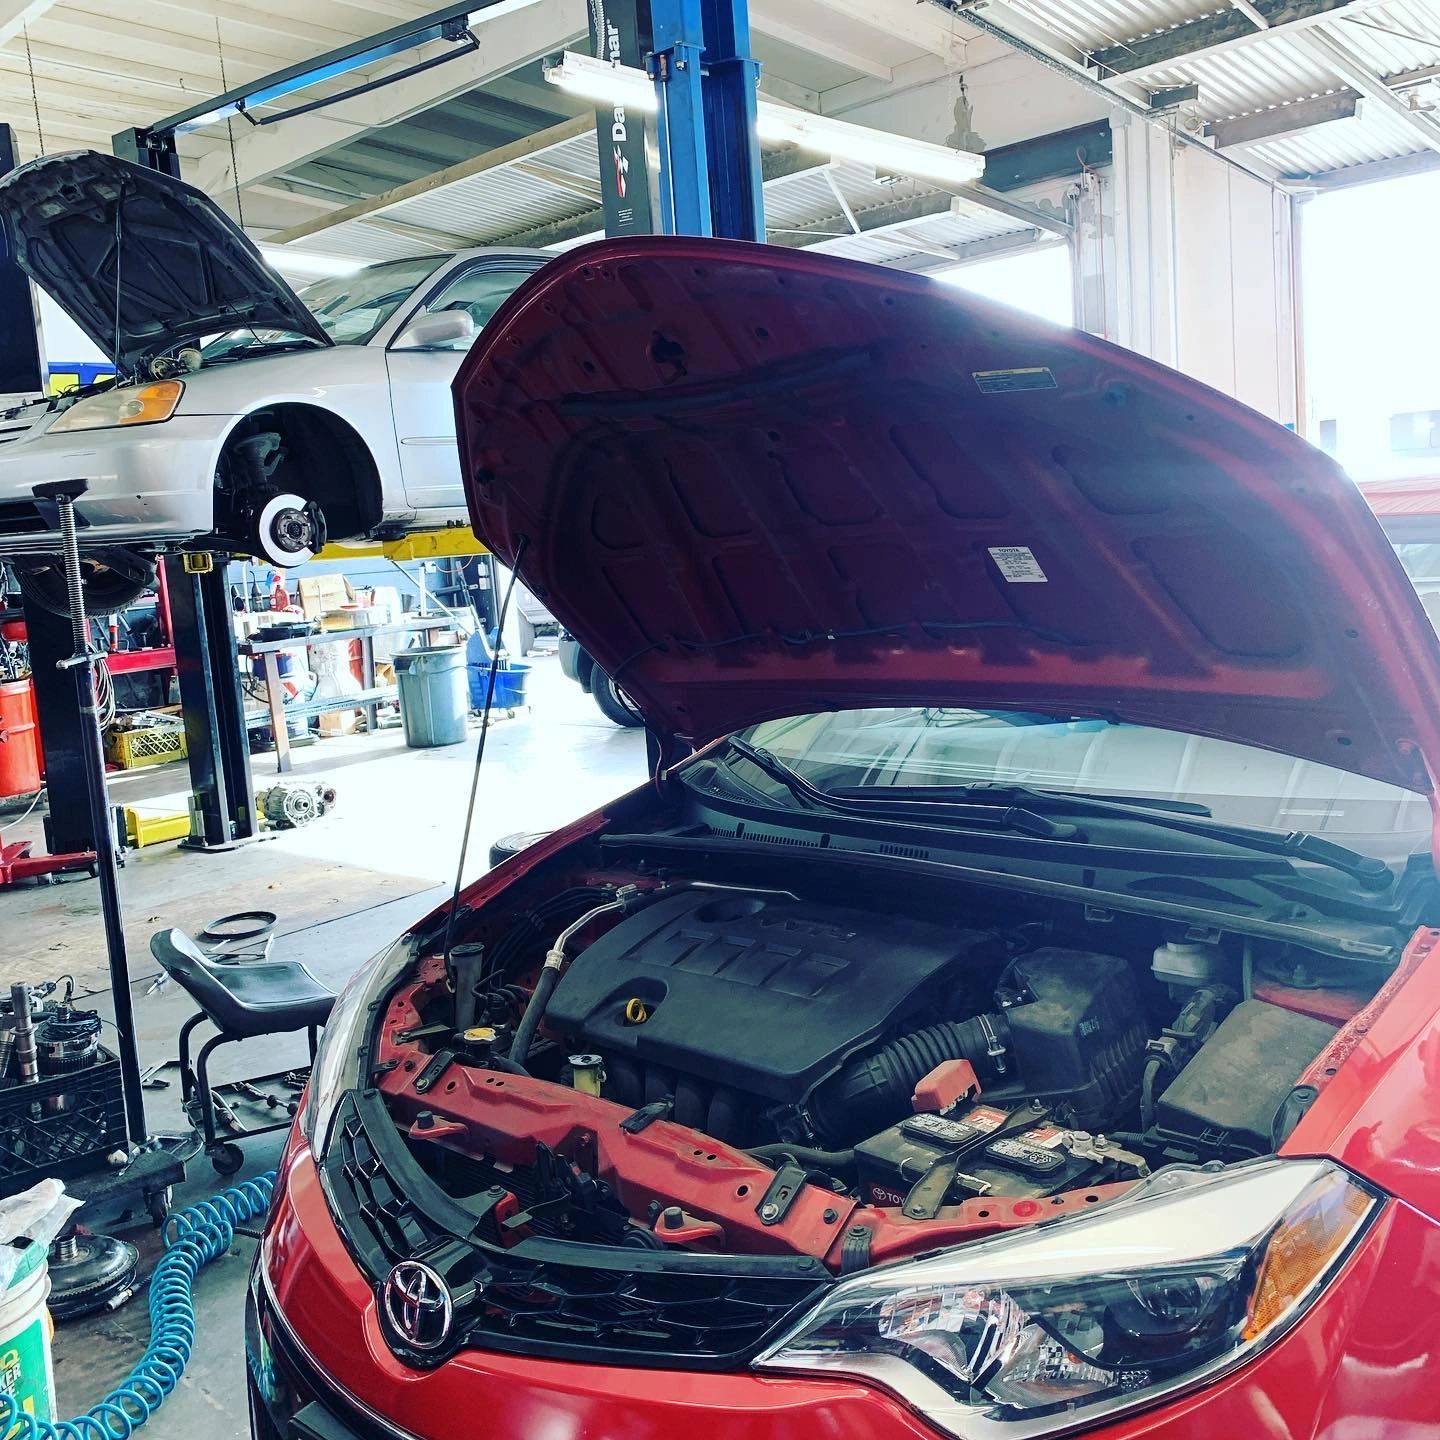 Oil change on a Toyota and transmission service on a Honda